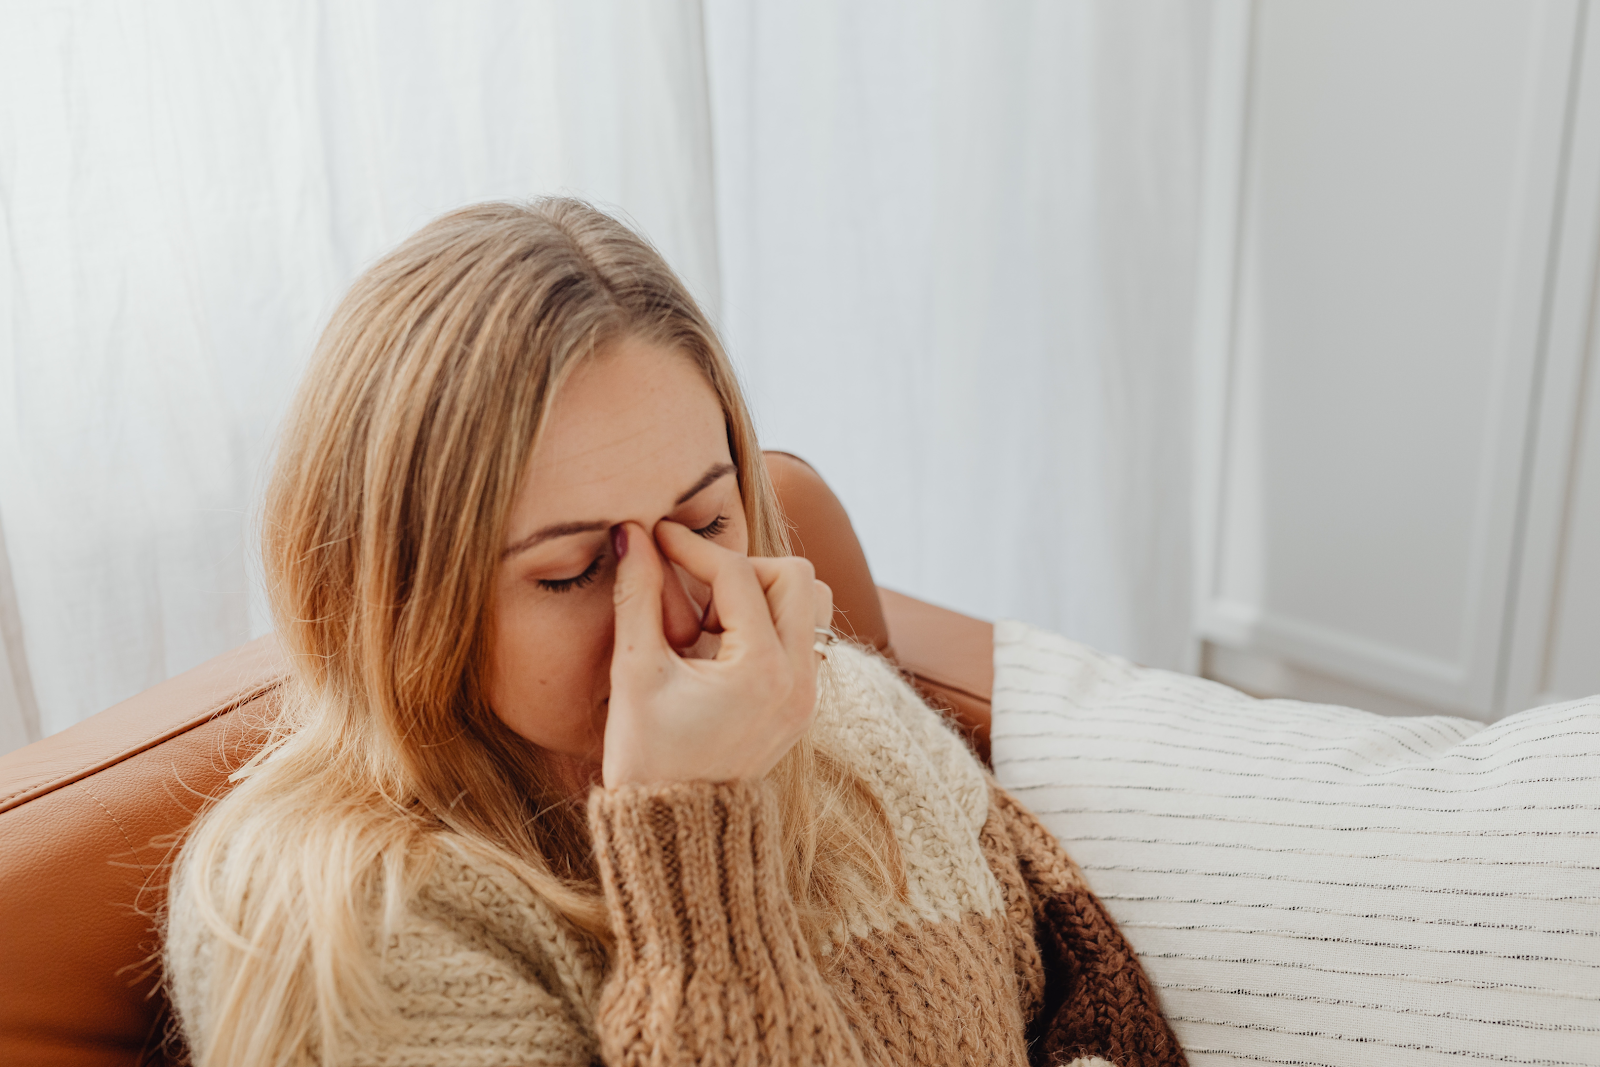 can chiropractic help with sinus problems?